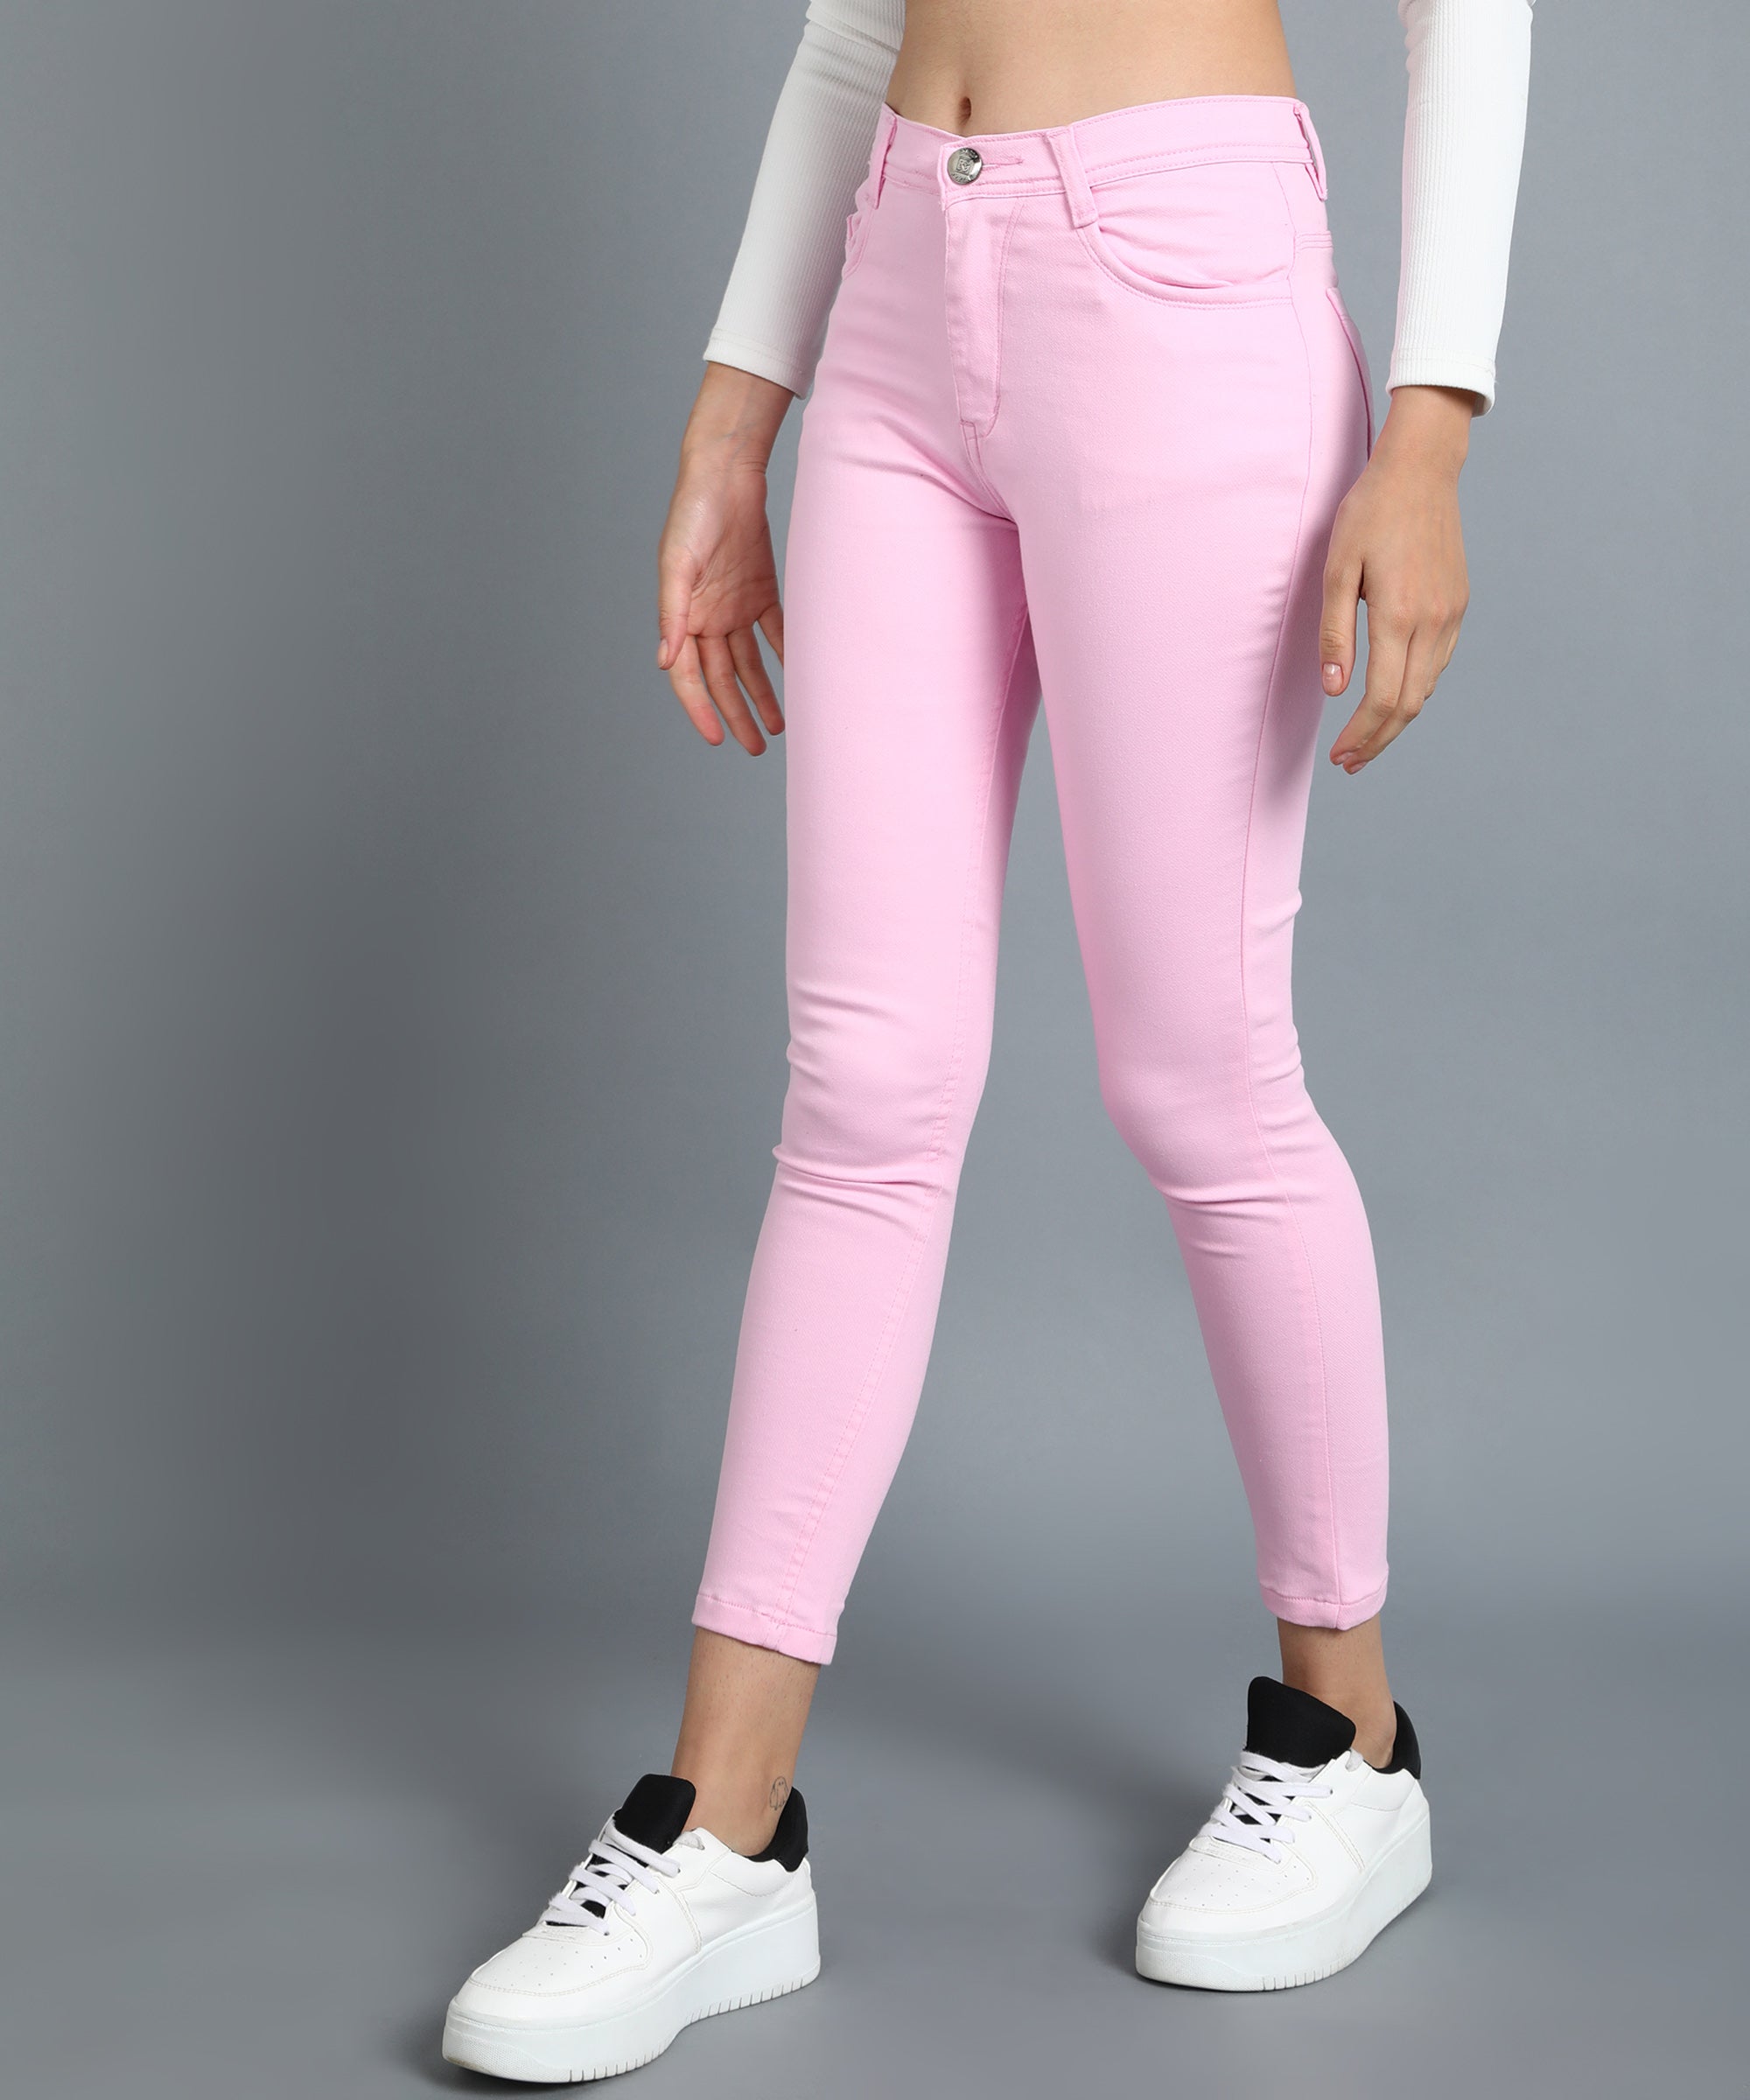 Pink slim fit 5- pocket high rise jeans, clean look, zip fly with button closure, waistband with belt loops